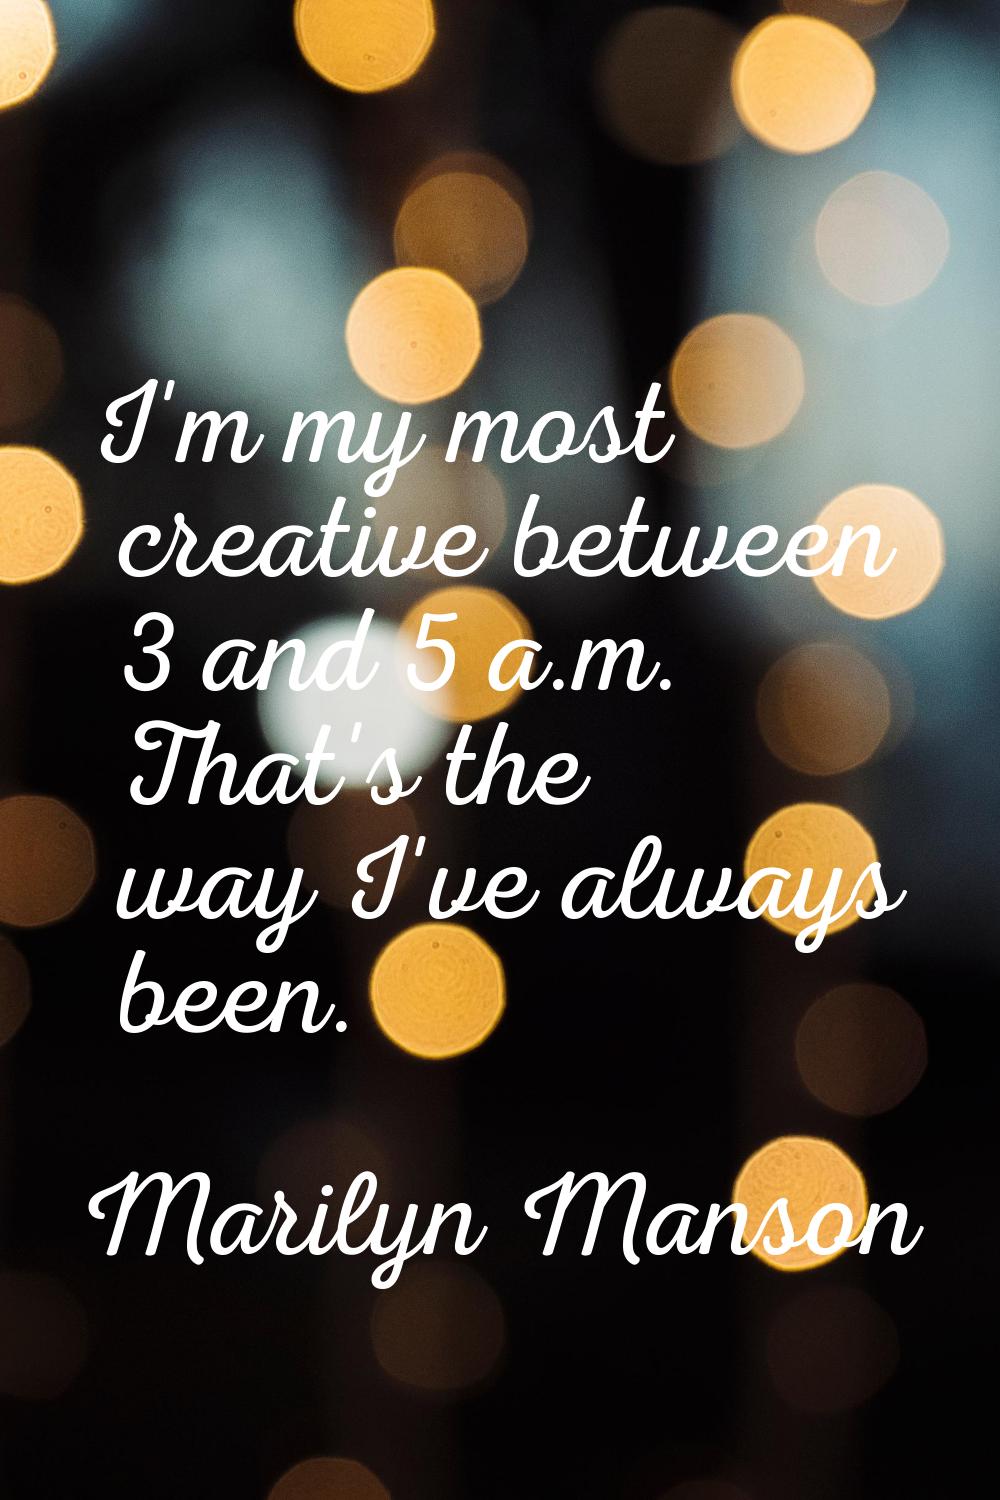 I'm my most creative between 3 and 5 a.m. That's the way I've always been.